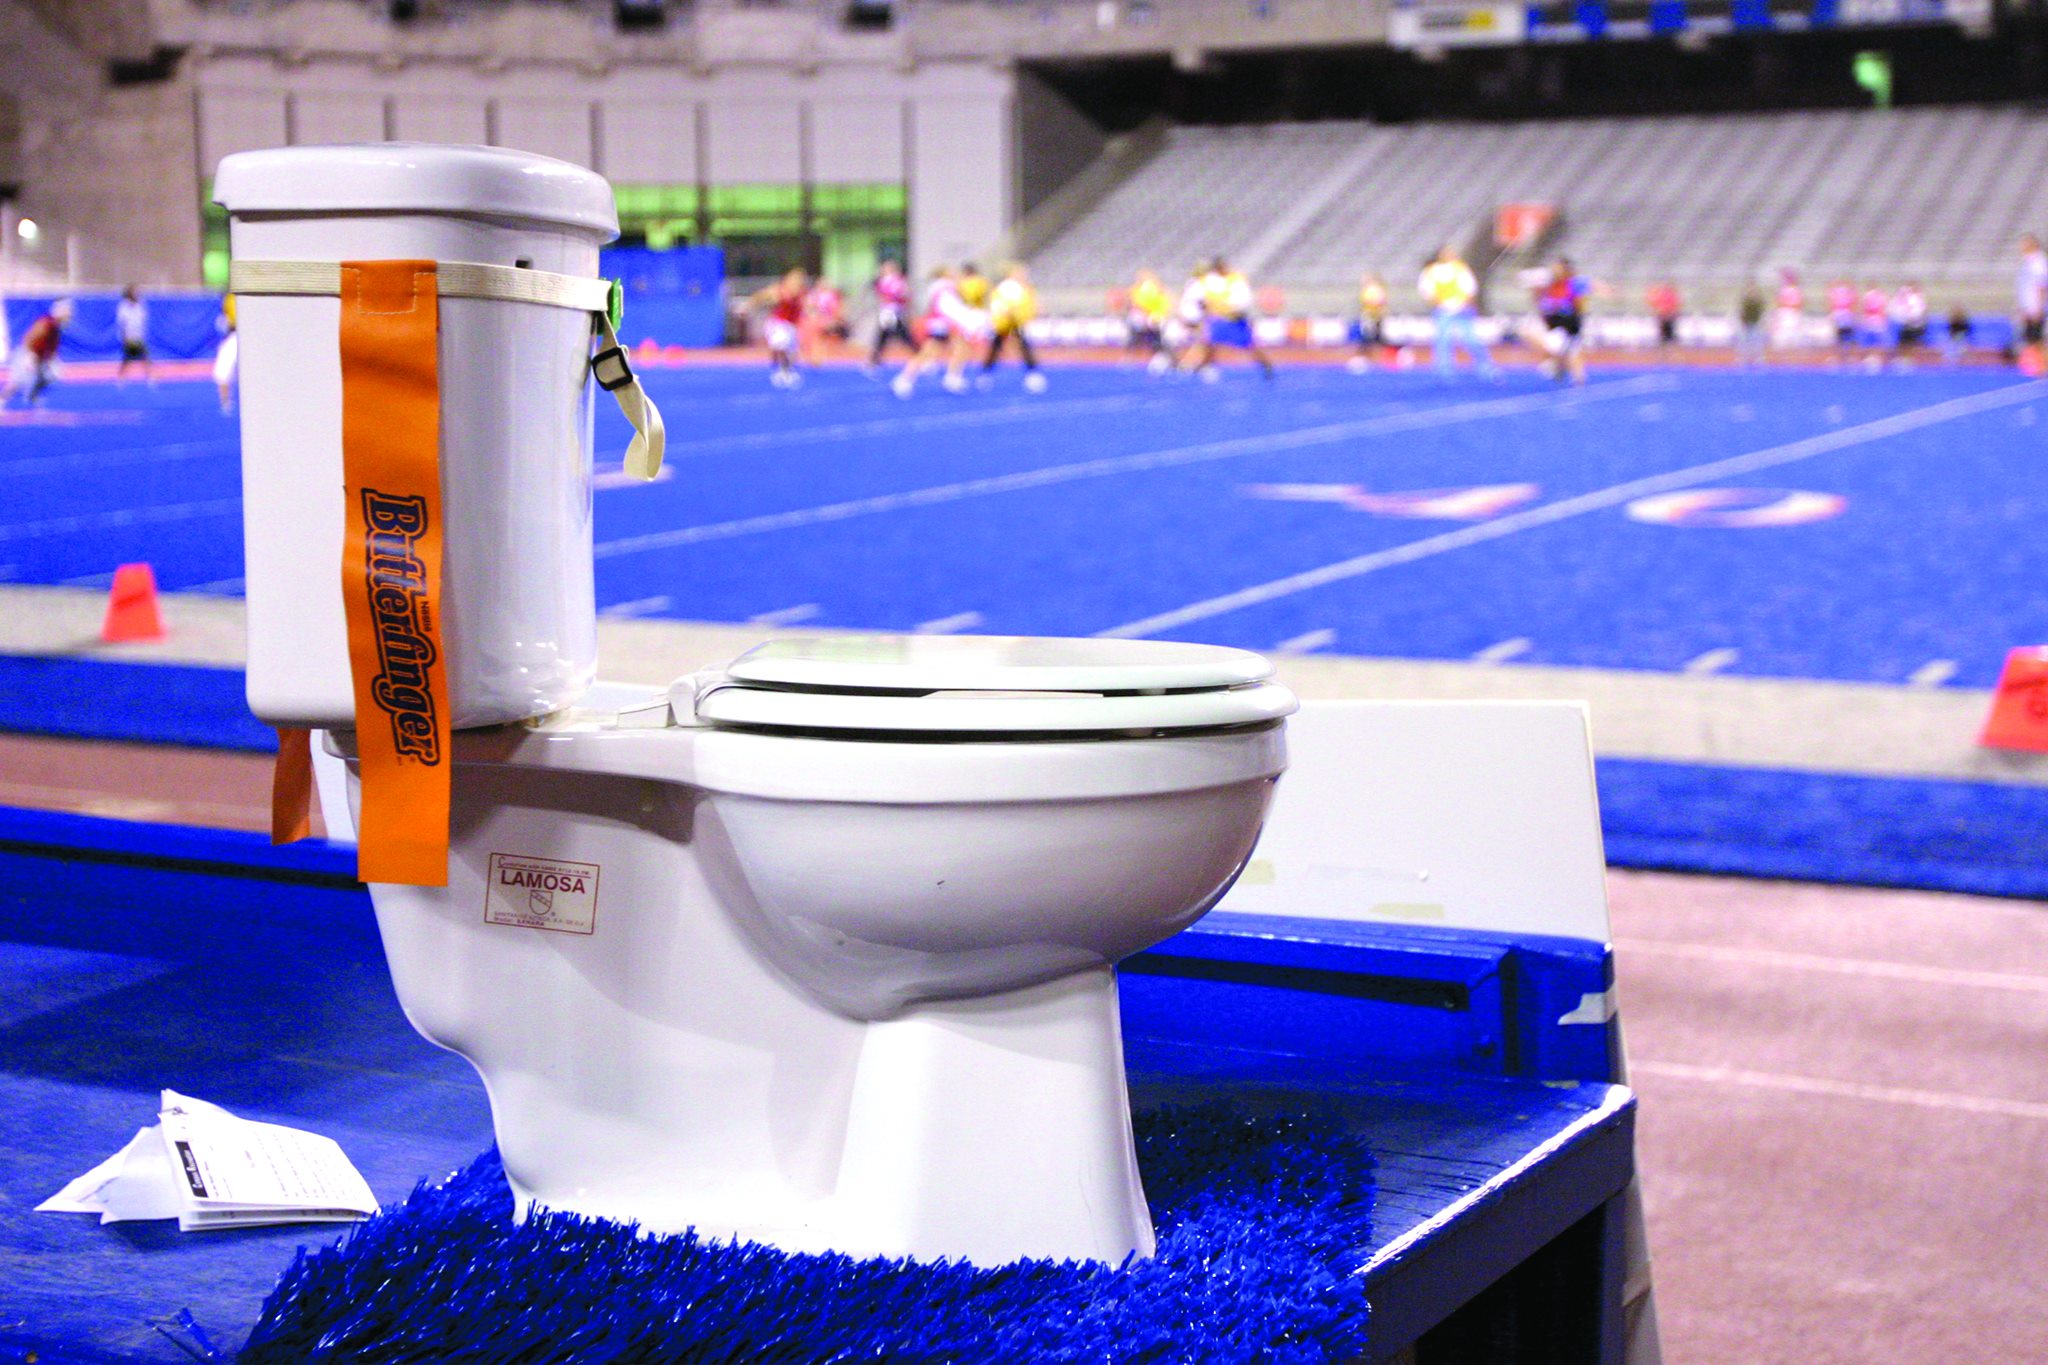 A toilet with flag football flags strapped around it